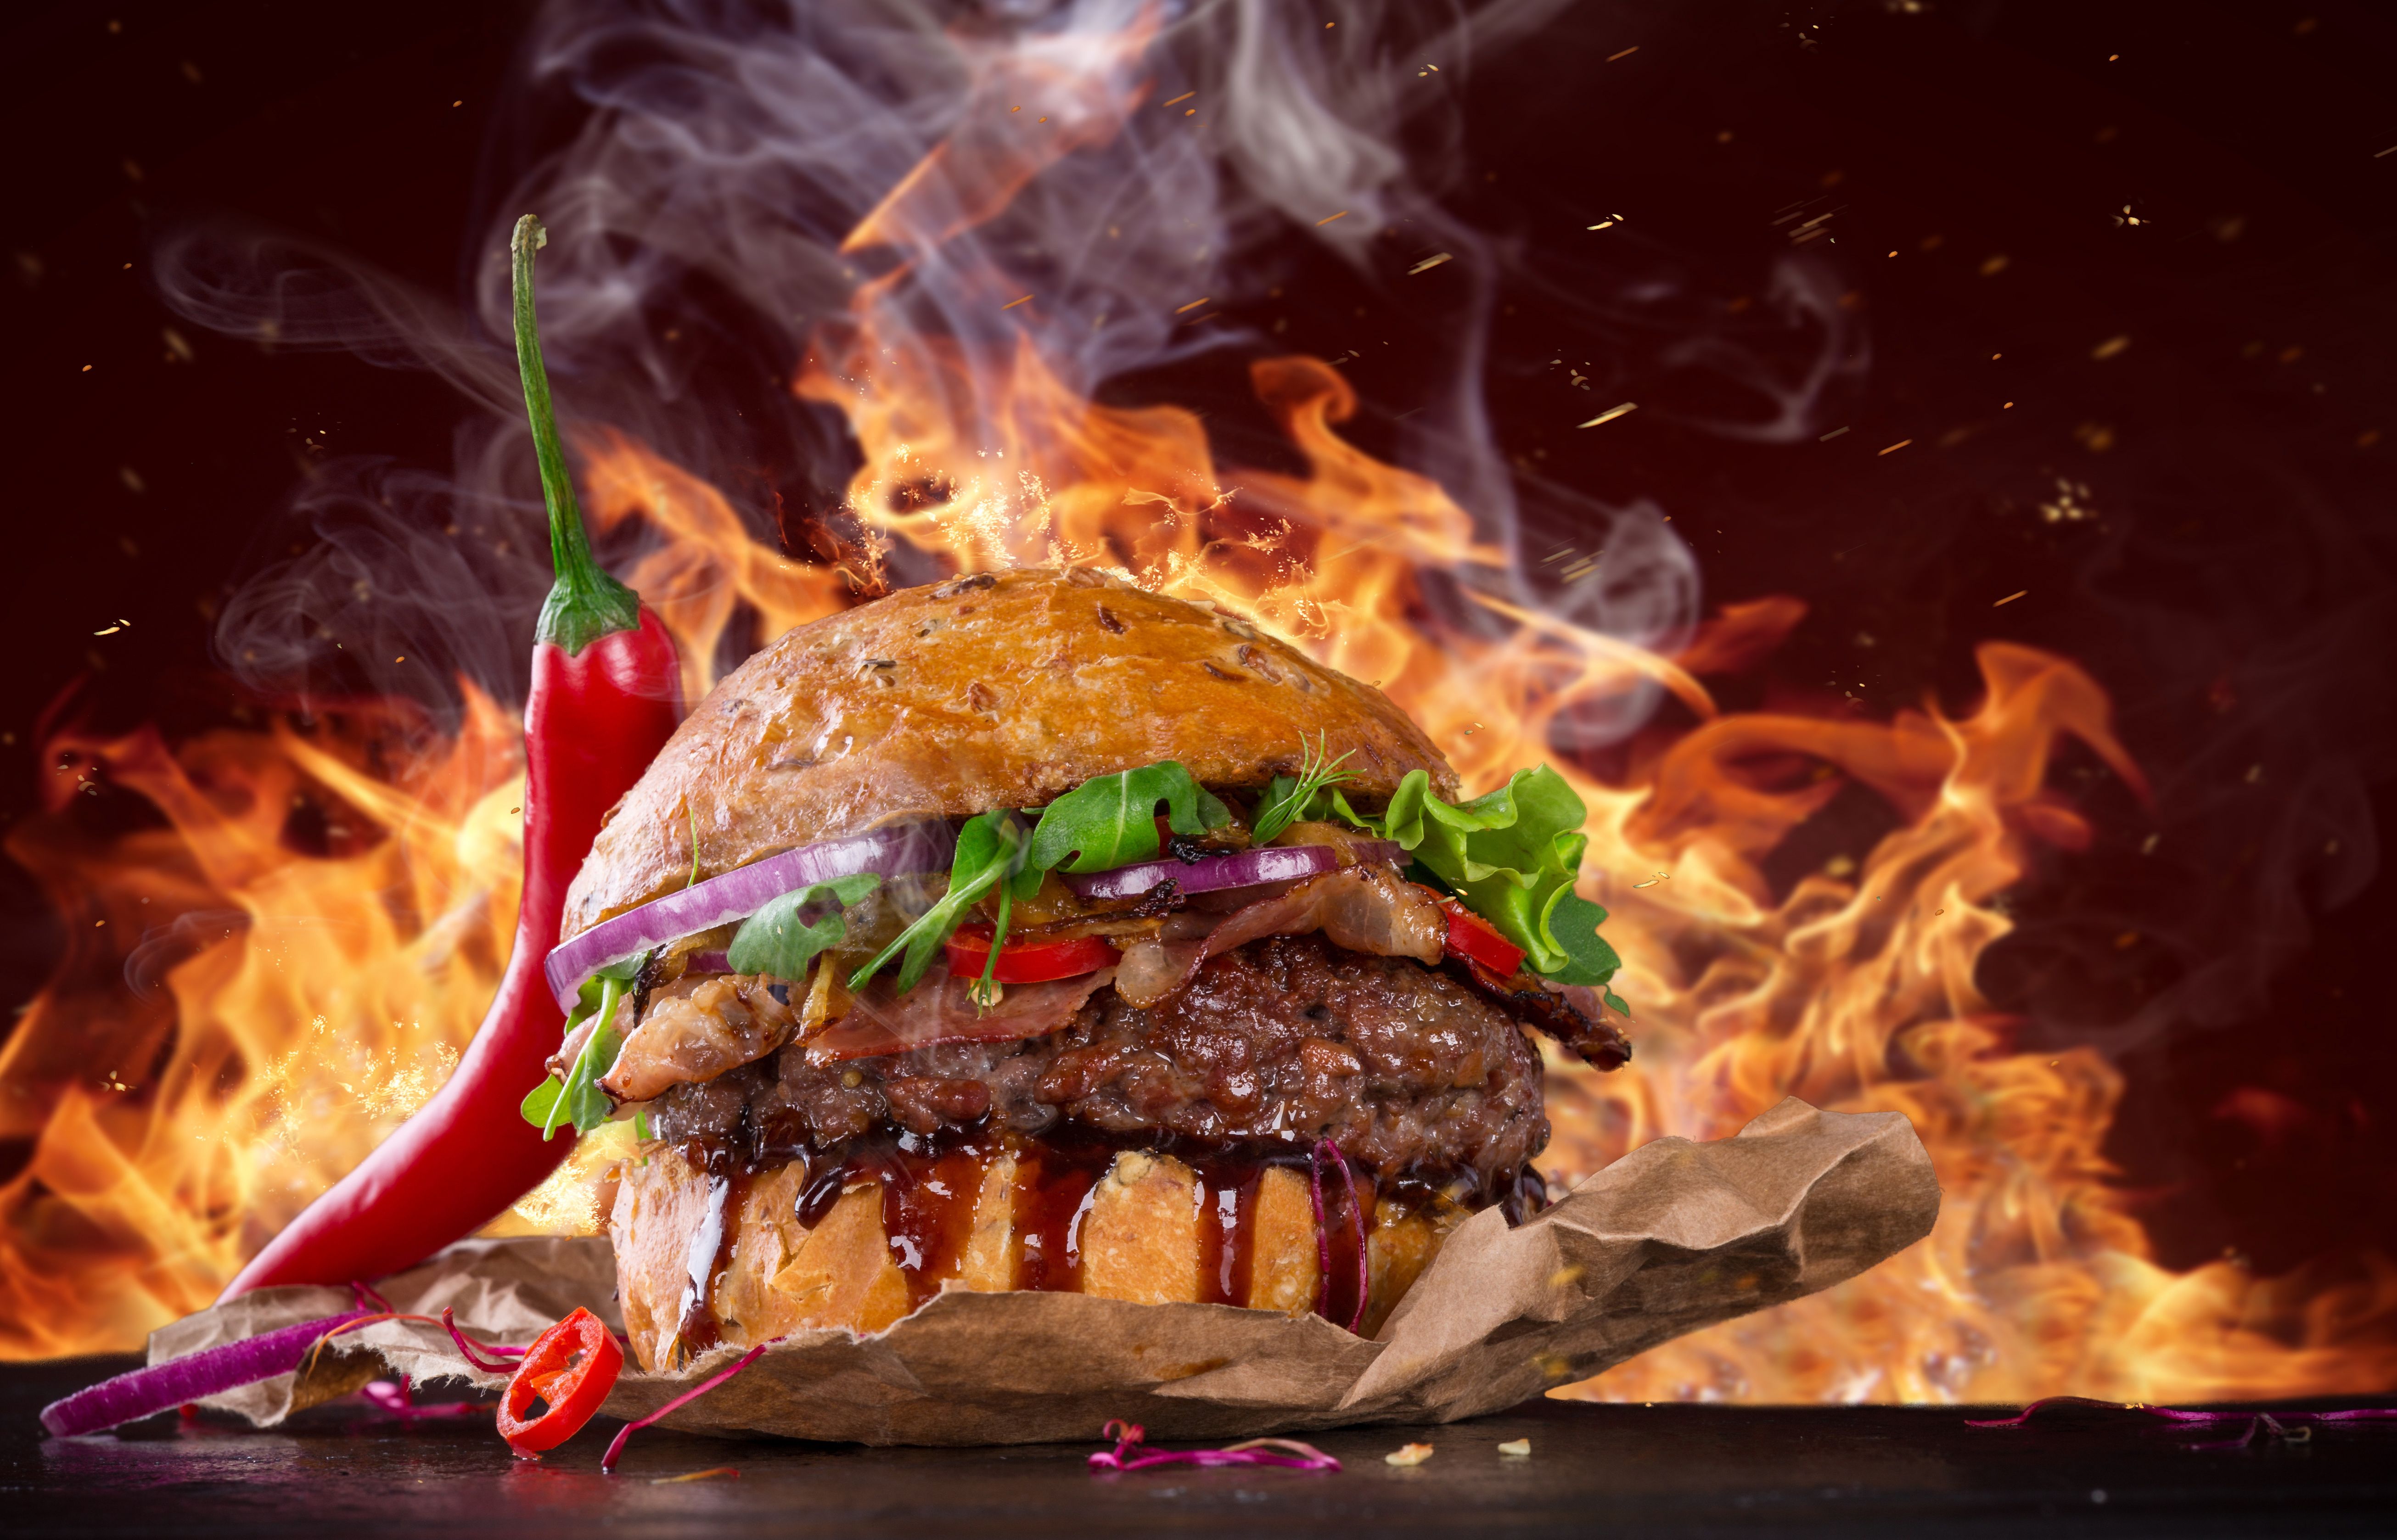 Hot Spicy Burger, HD Food, 4k Wallpaper, Image, Background